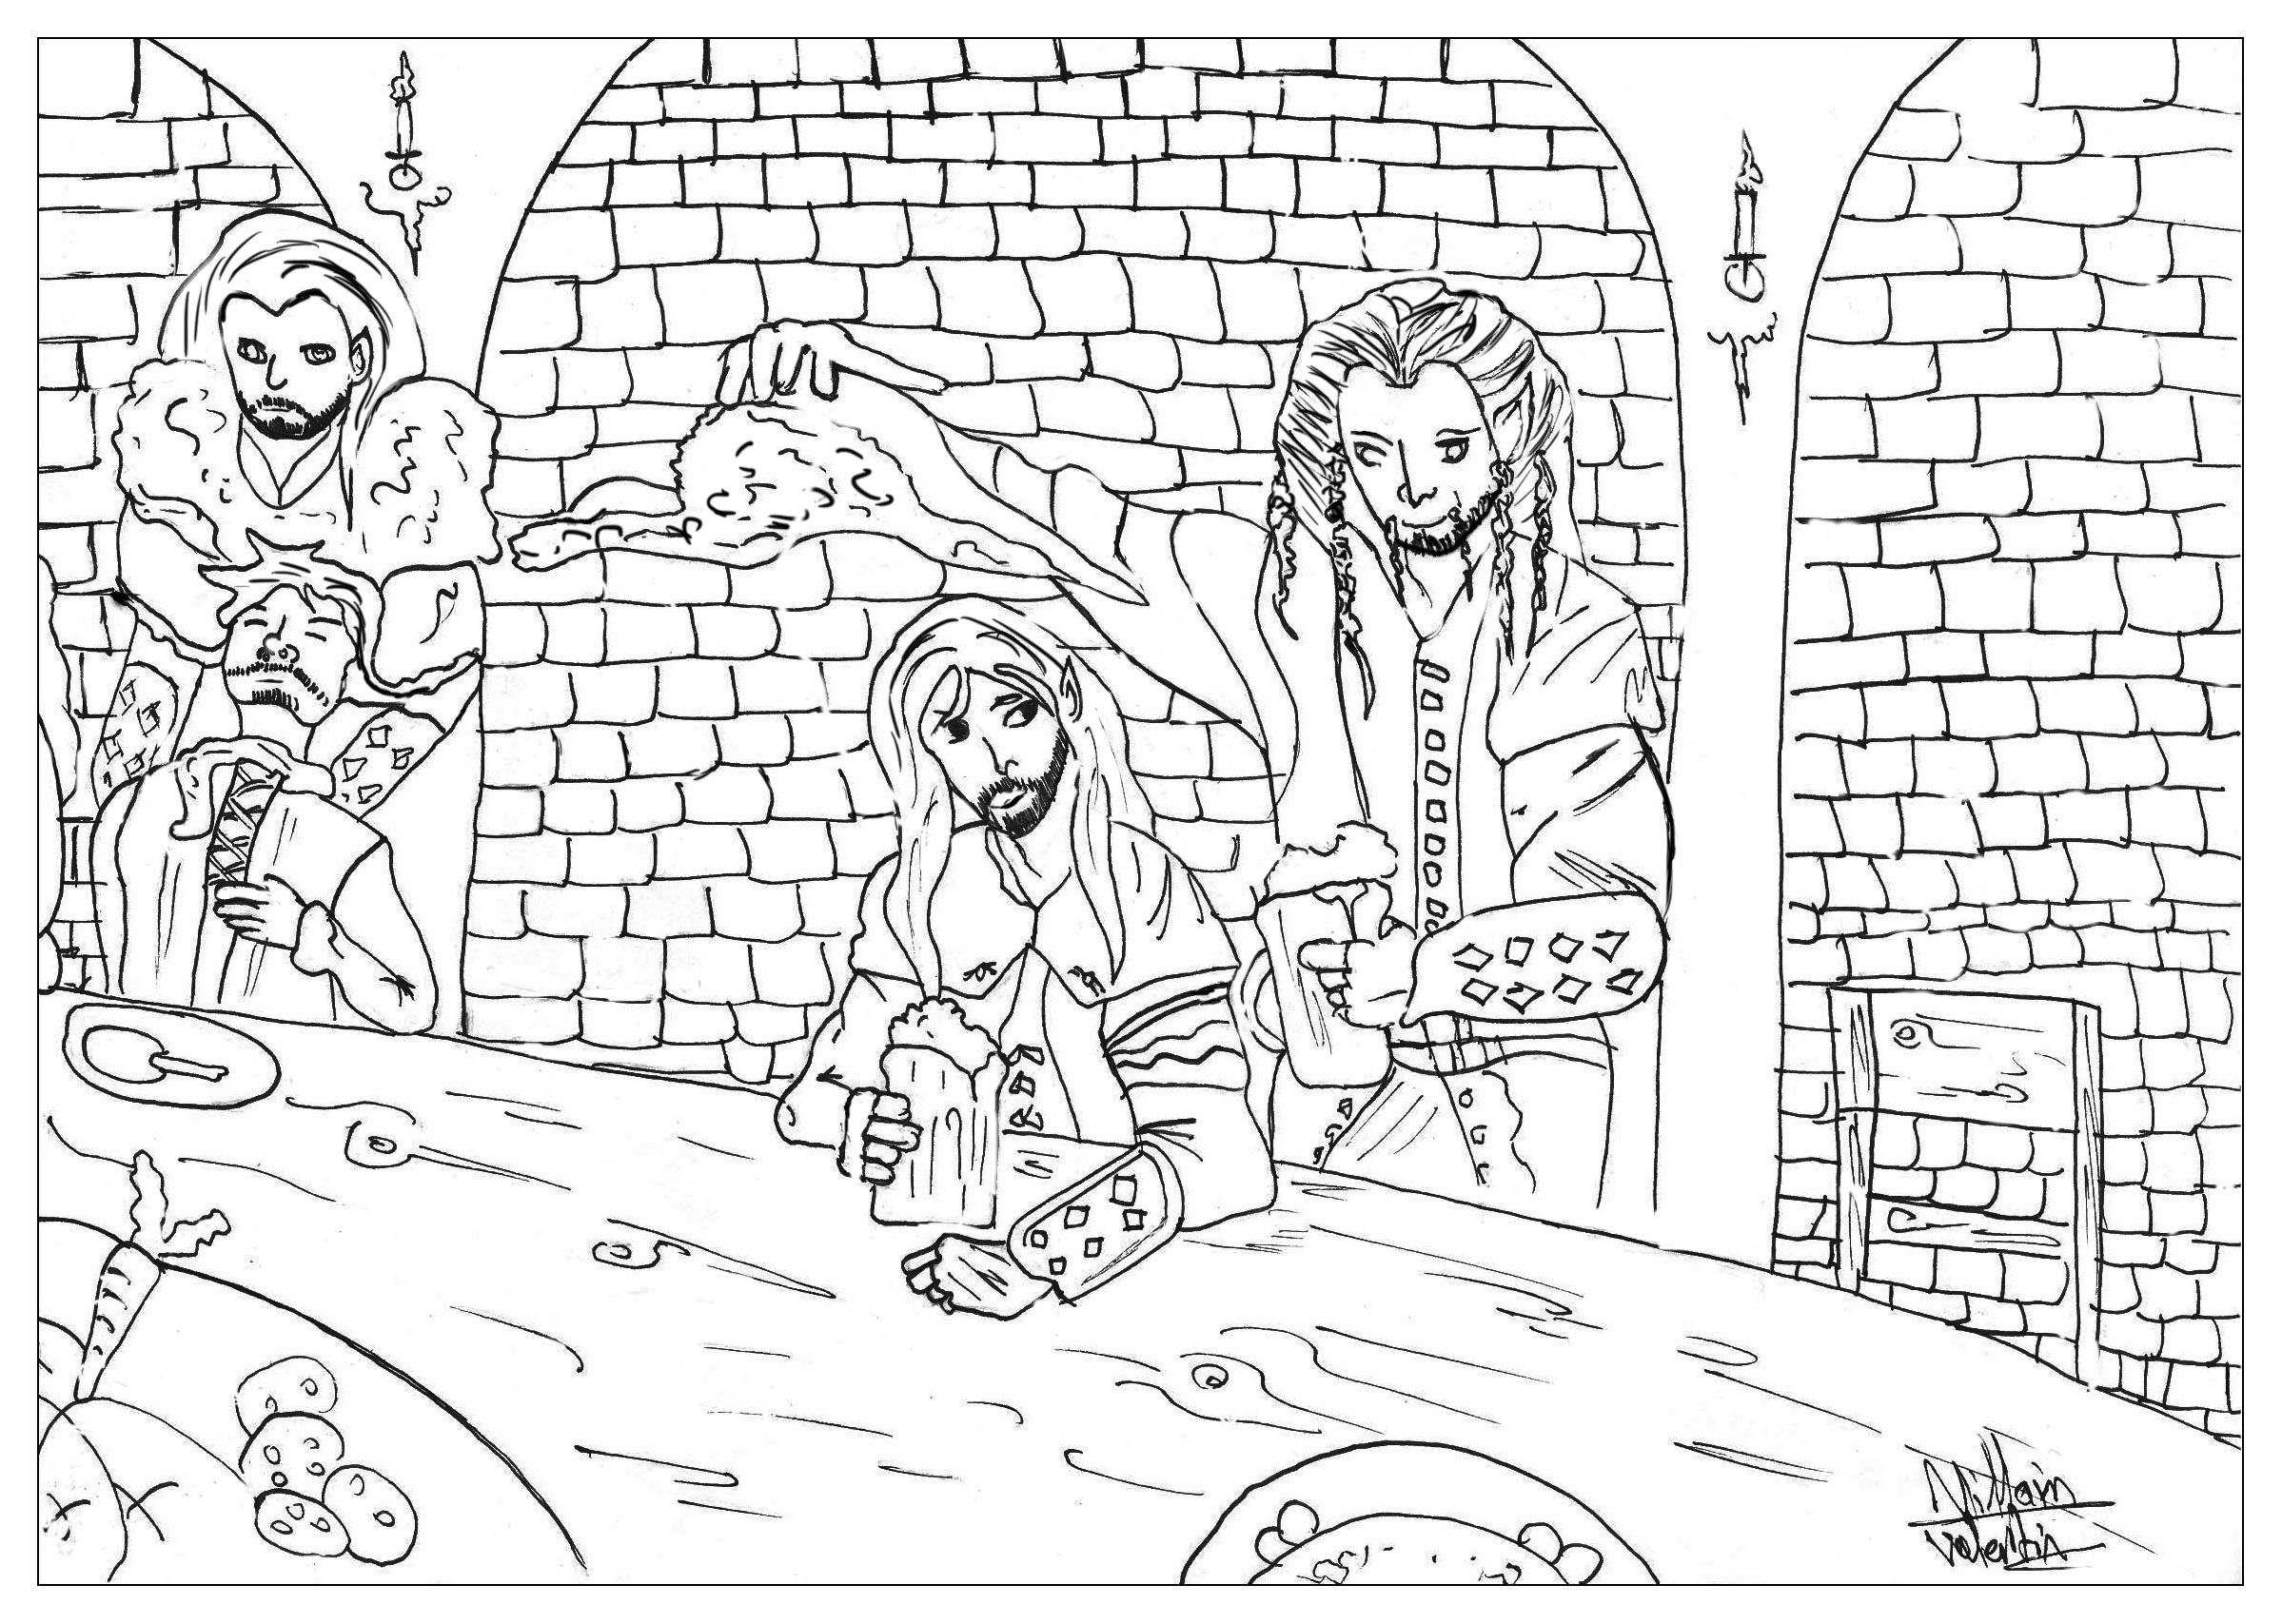 Myths & legends - Coloring Pages for adults